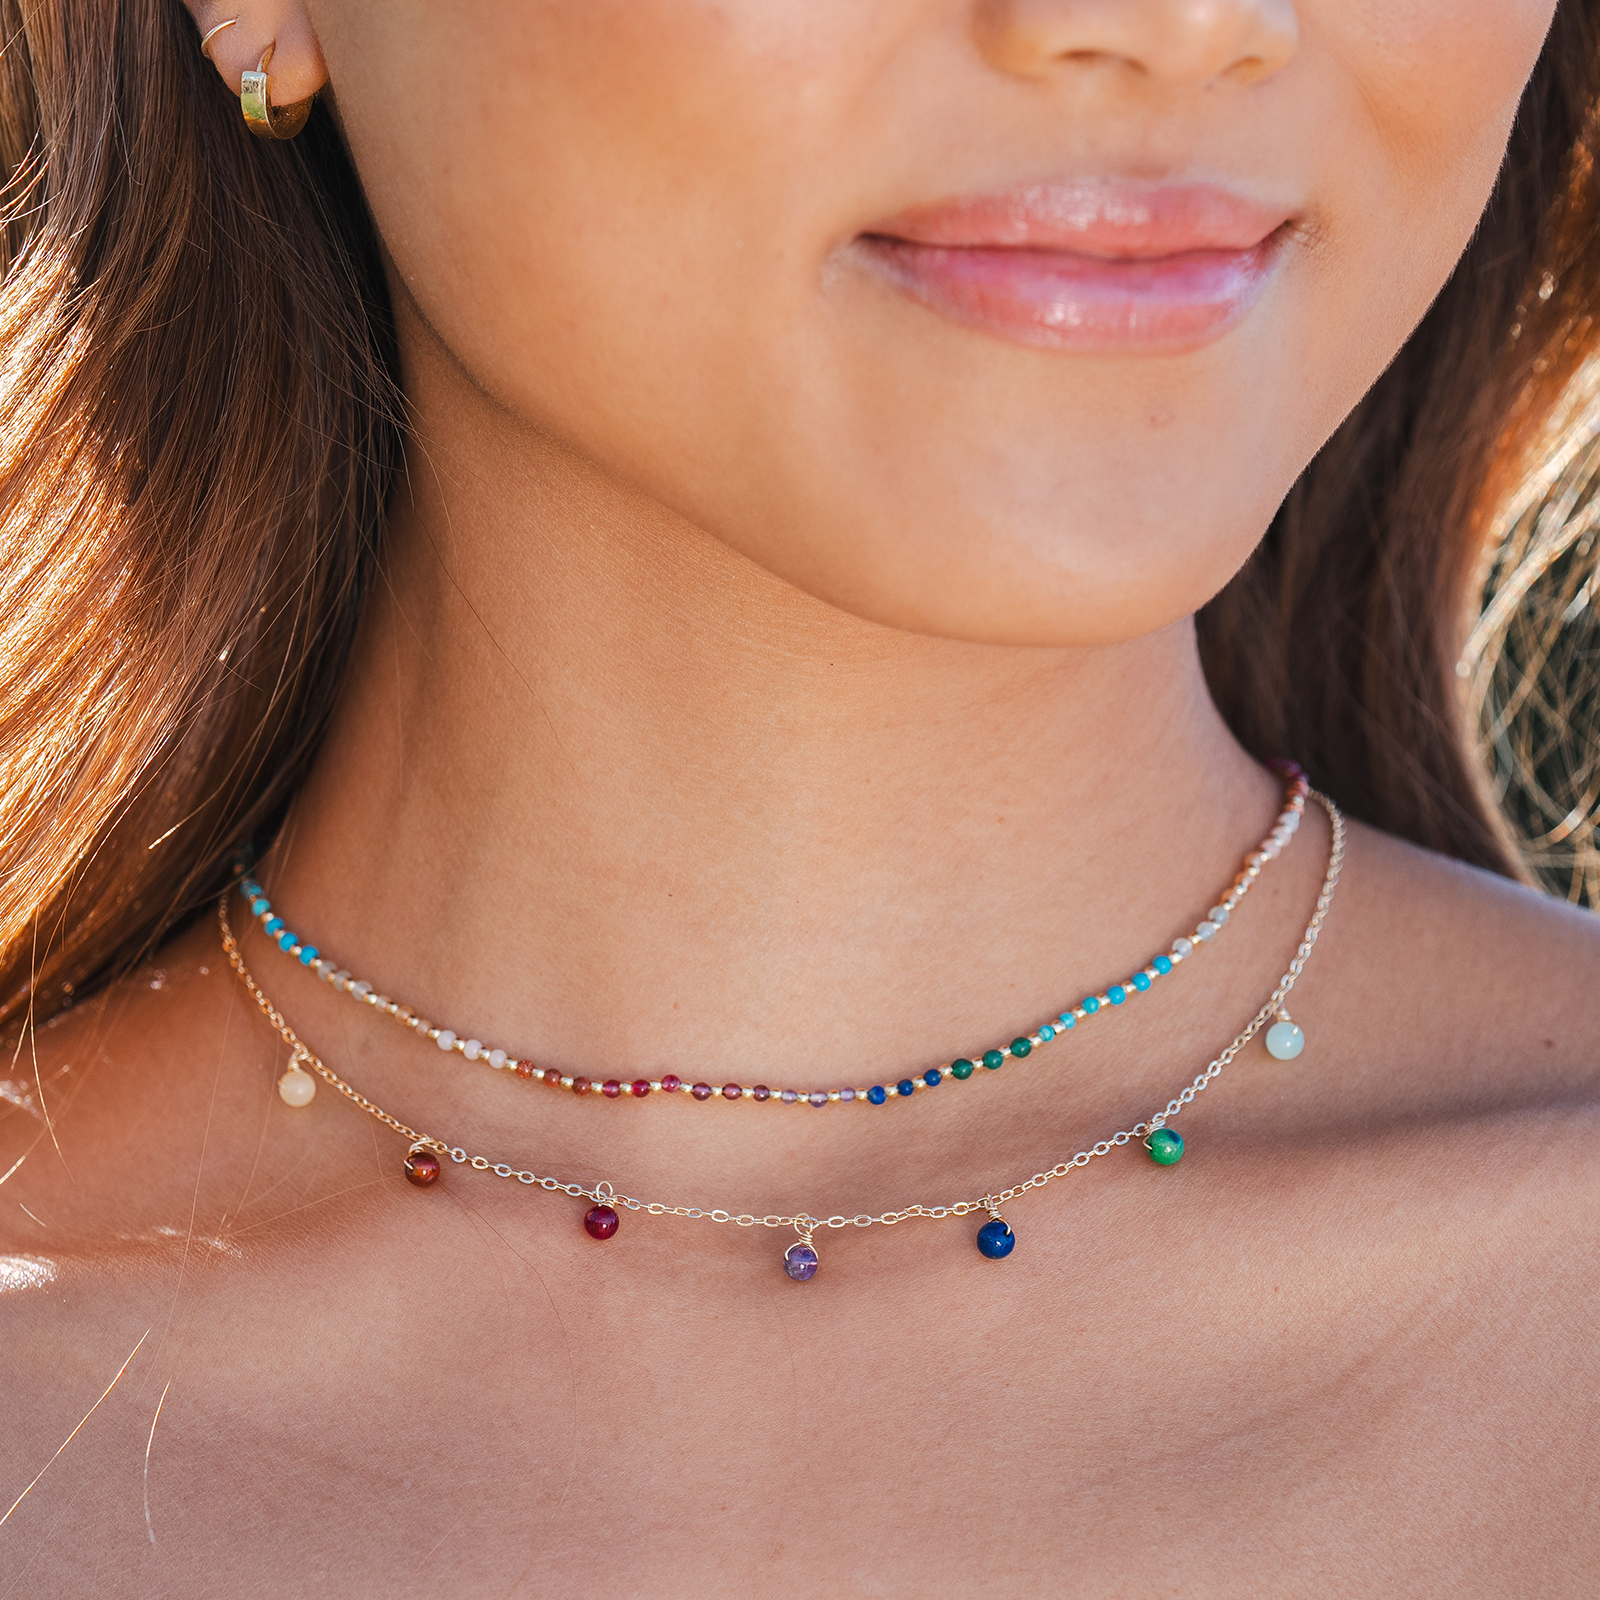 Model wearing a healing necklace stack. The necklaces include a 2mm multicolor stone and gold bead healing necklace and a multicolor stone dewdrop charm gold chain necklace